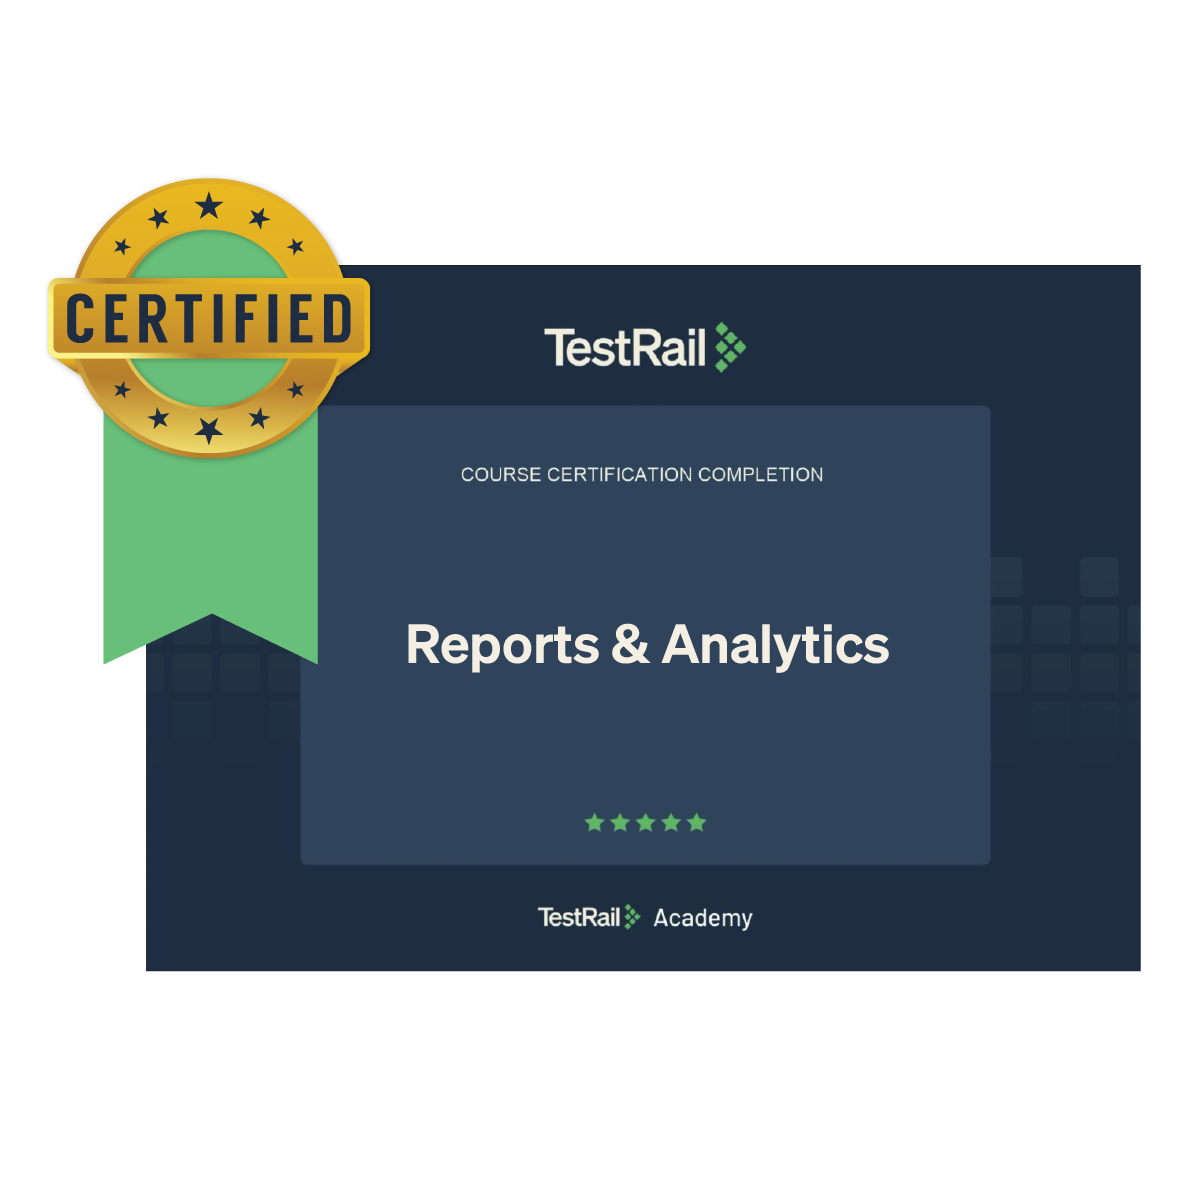 Reports & Analytics in TestRail